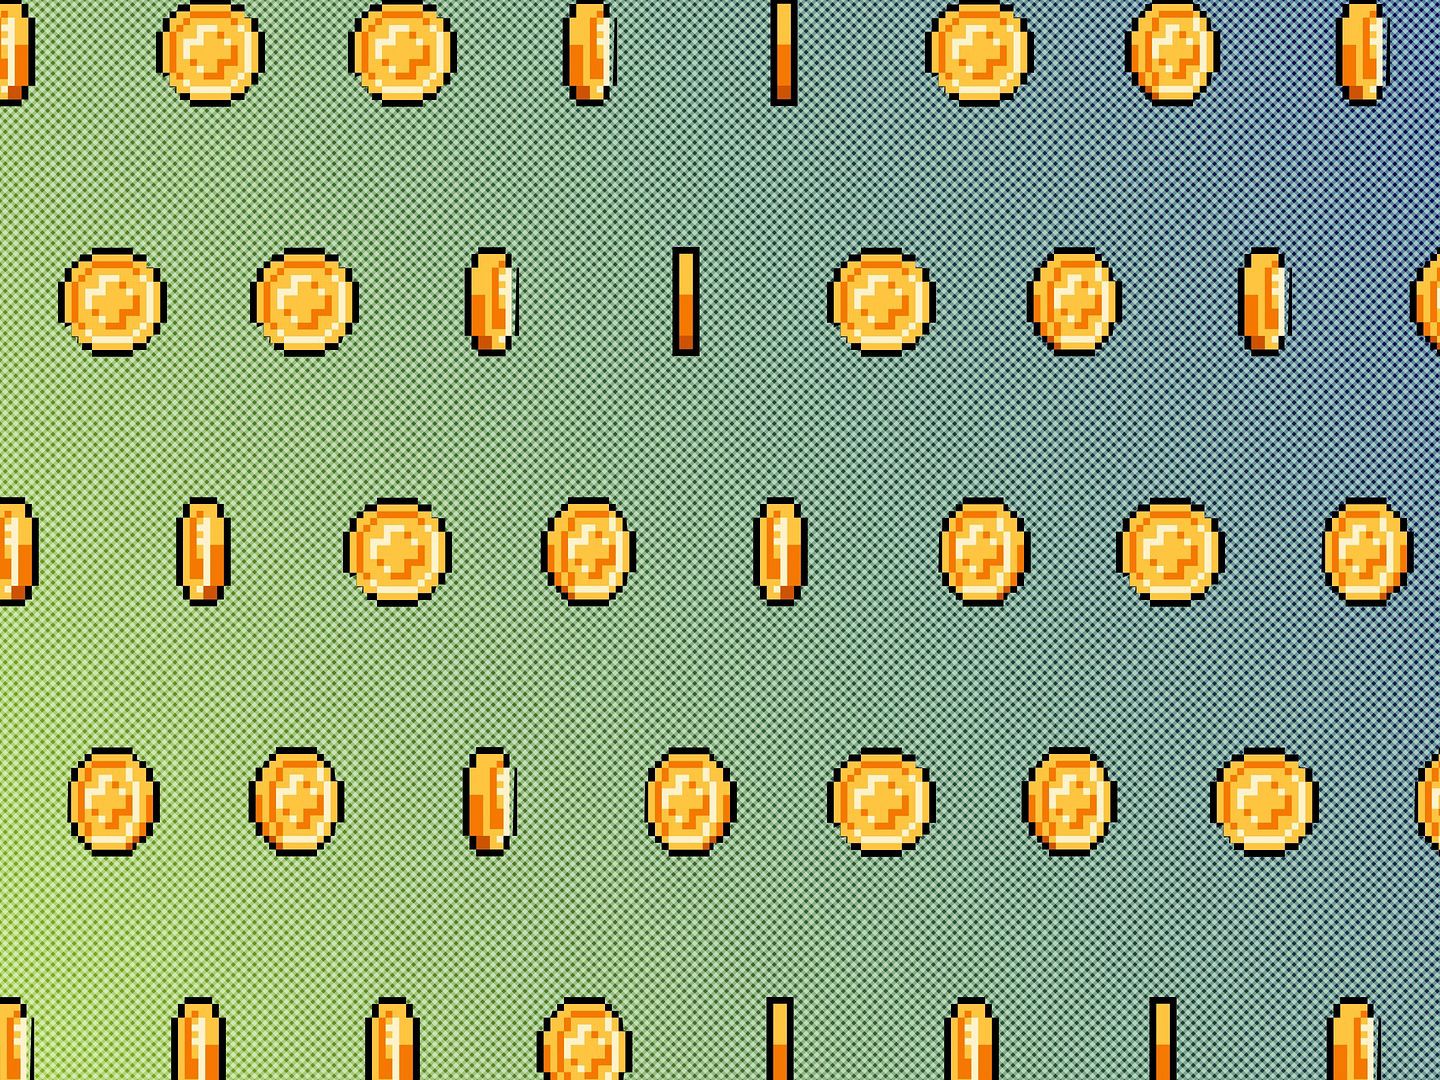 What You Should Know About Crypto Gaming Coins